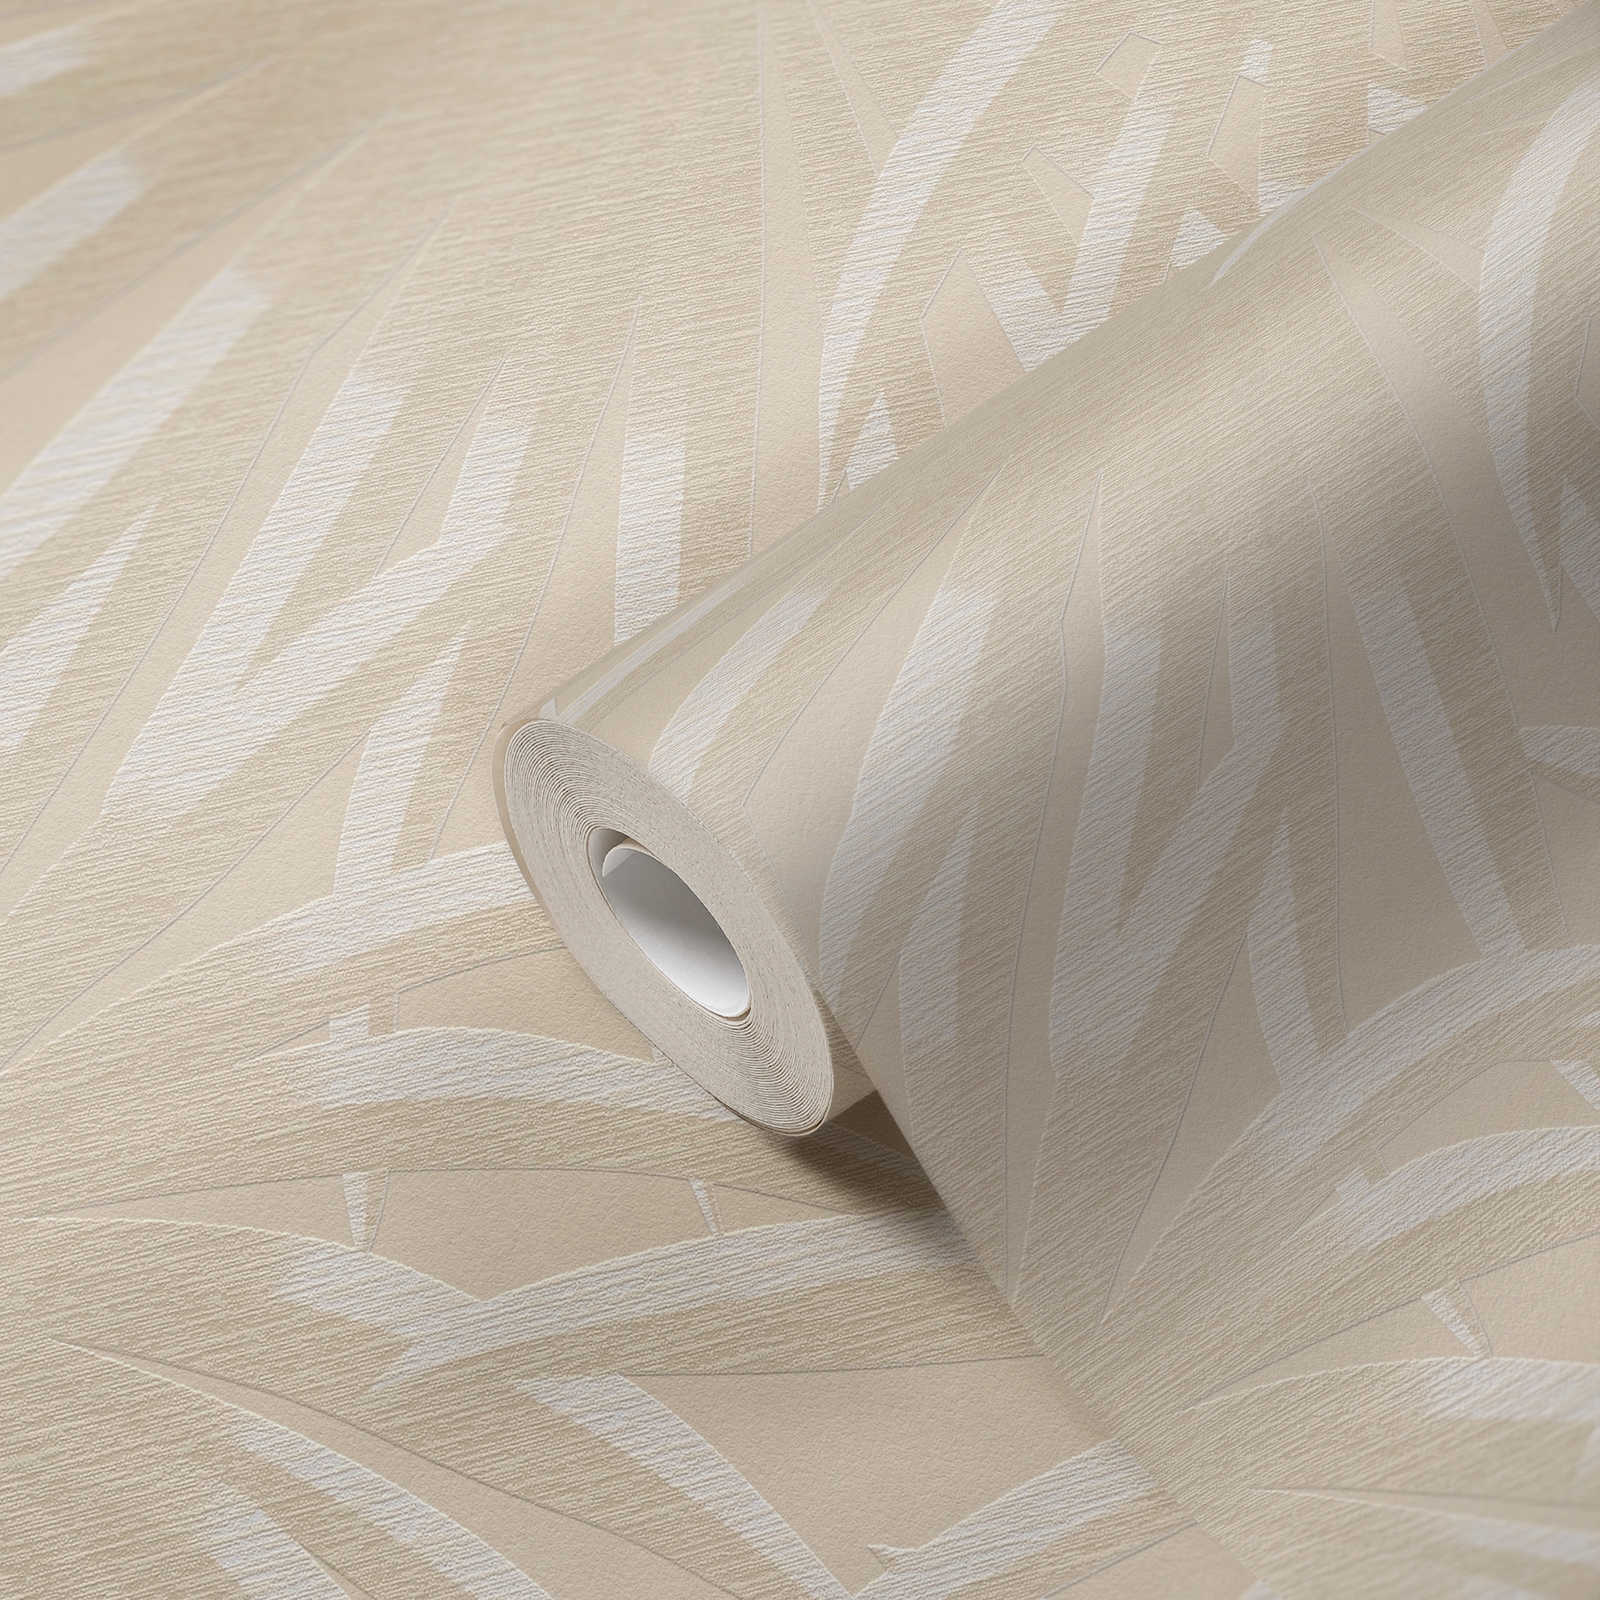             Floral non-woven wallpaper with palm leaves - beige, white
        